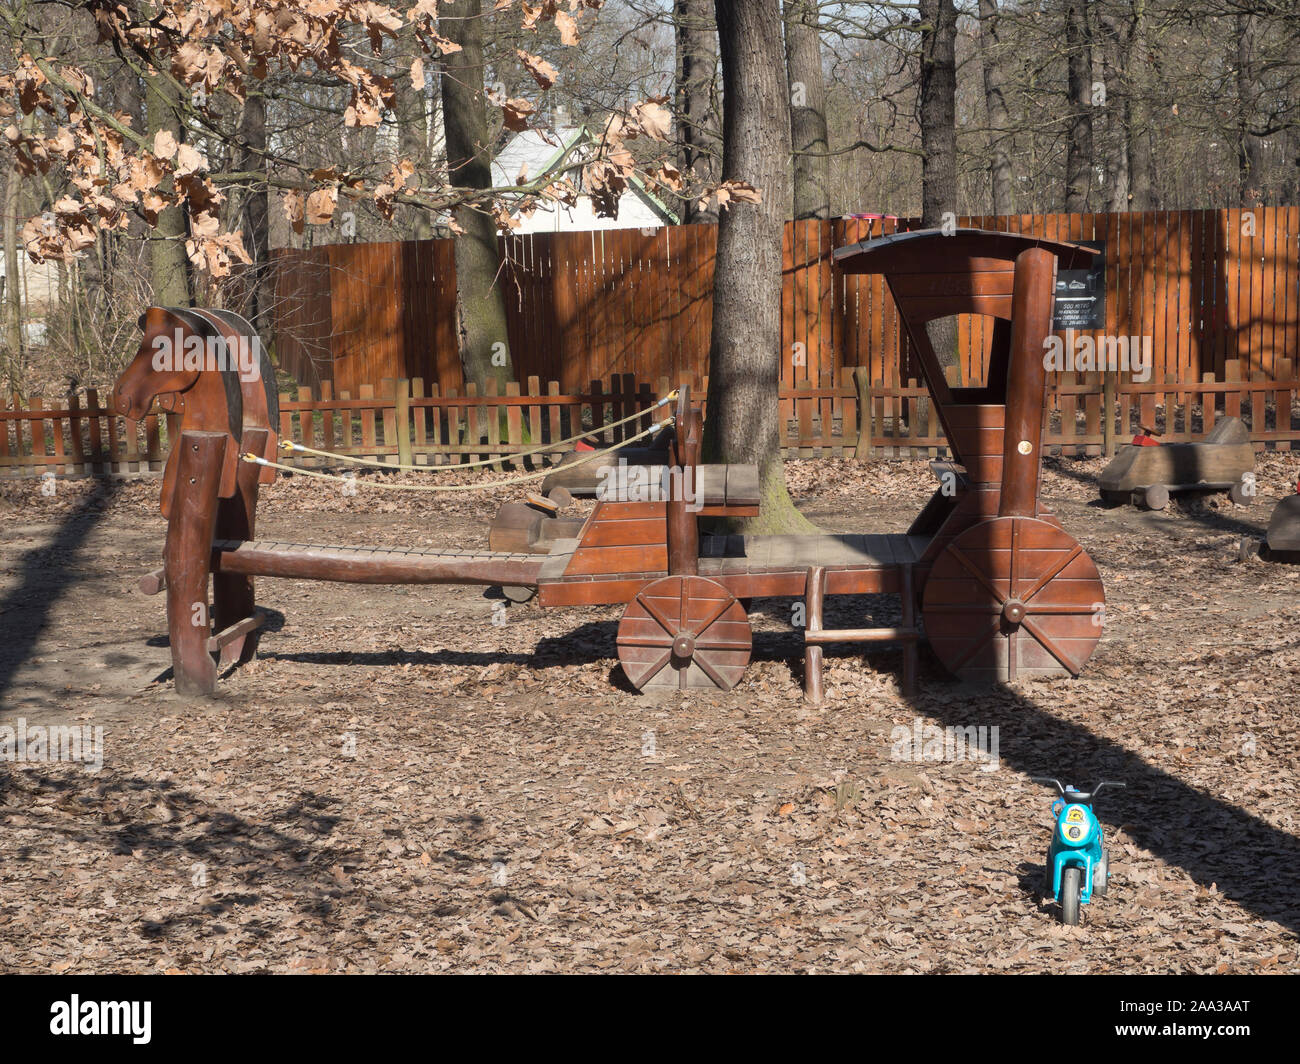 Sturdy wooden horse and cart with a contrasting plastic roller toy in a playground in the Čimický háj forest in a suburb of Prague Czech Republic Stock Photo